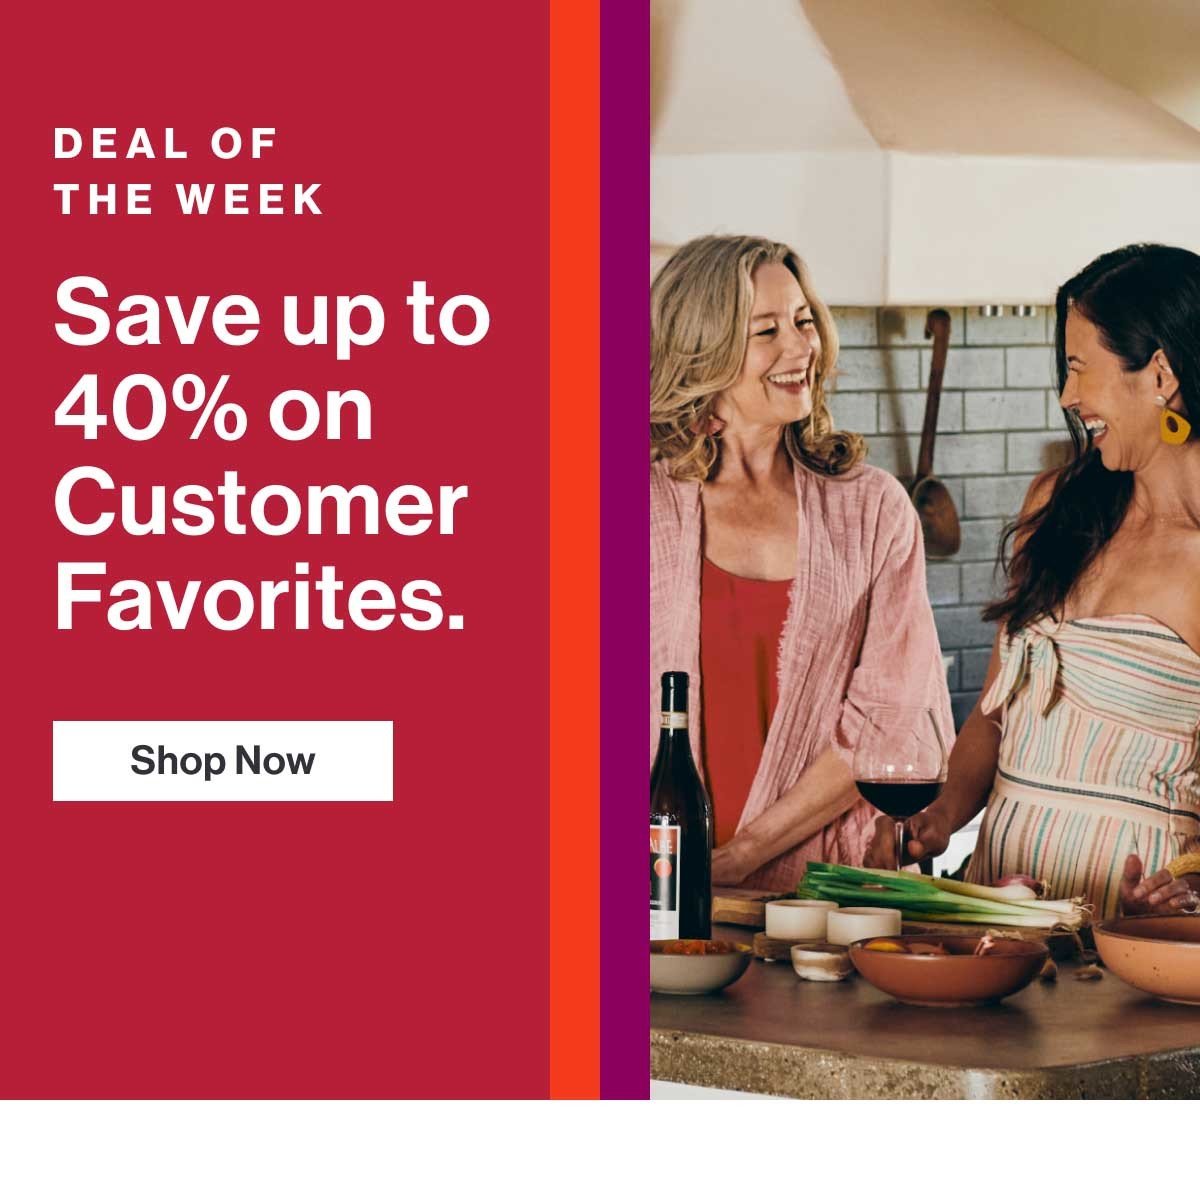 Save up to 40% on Customer Favorites